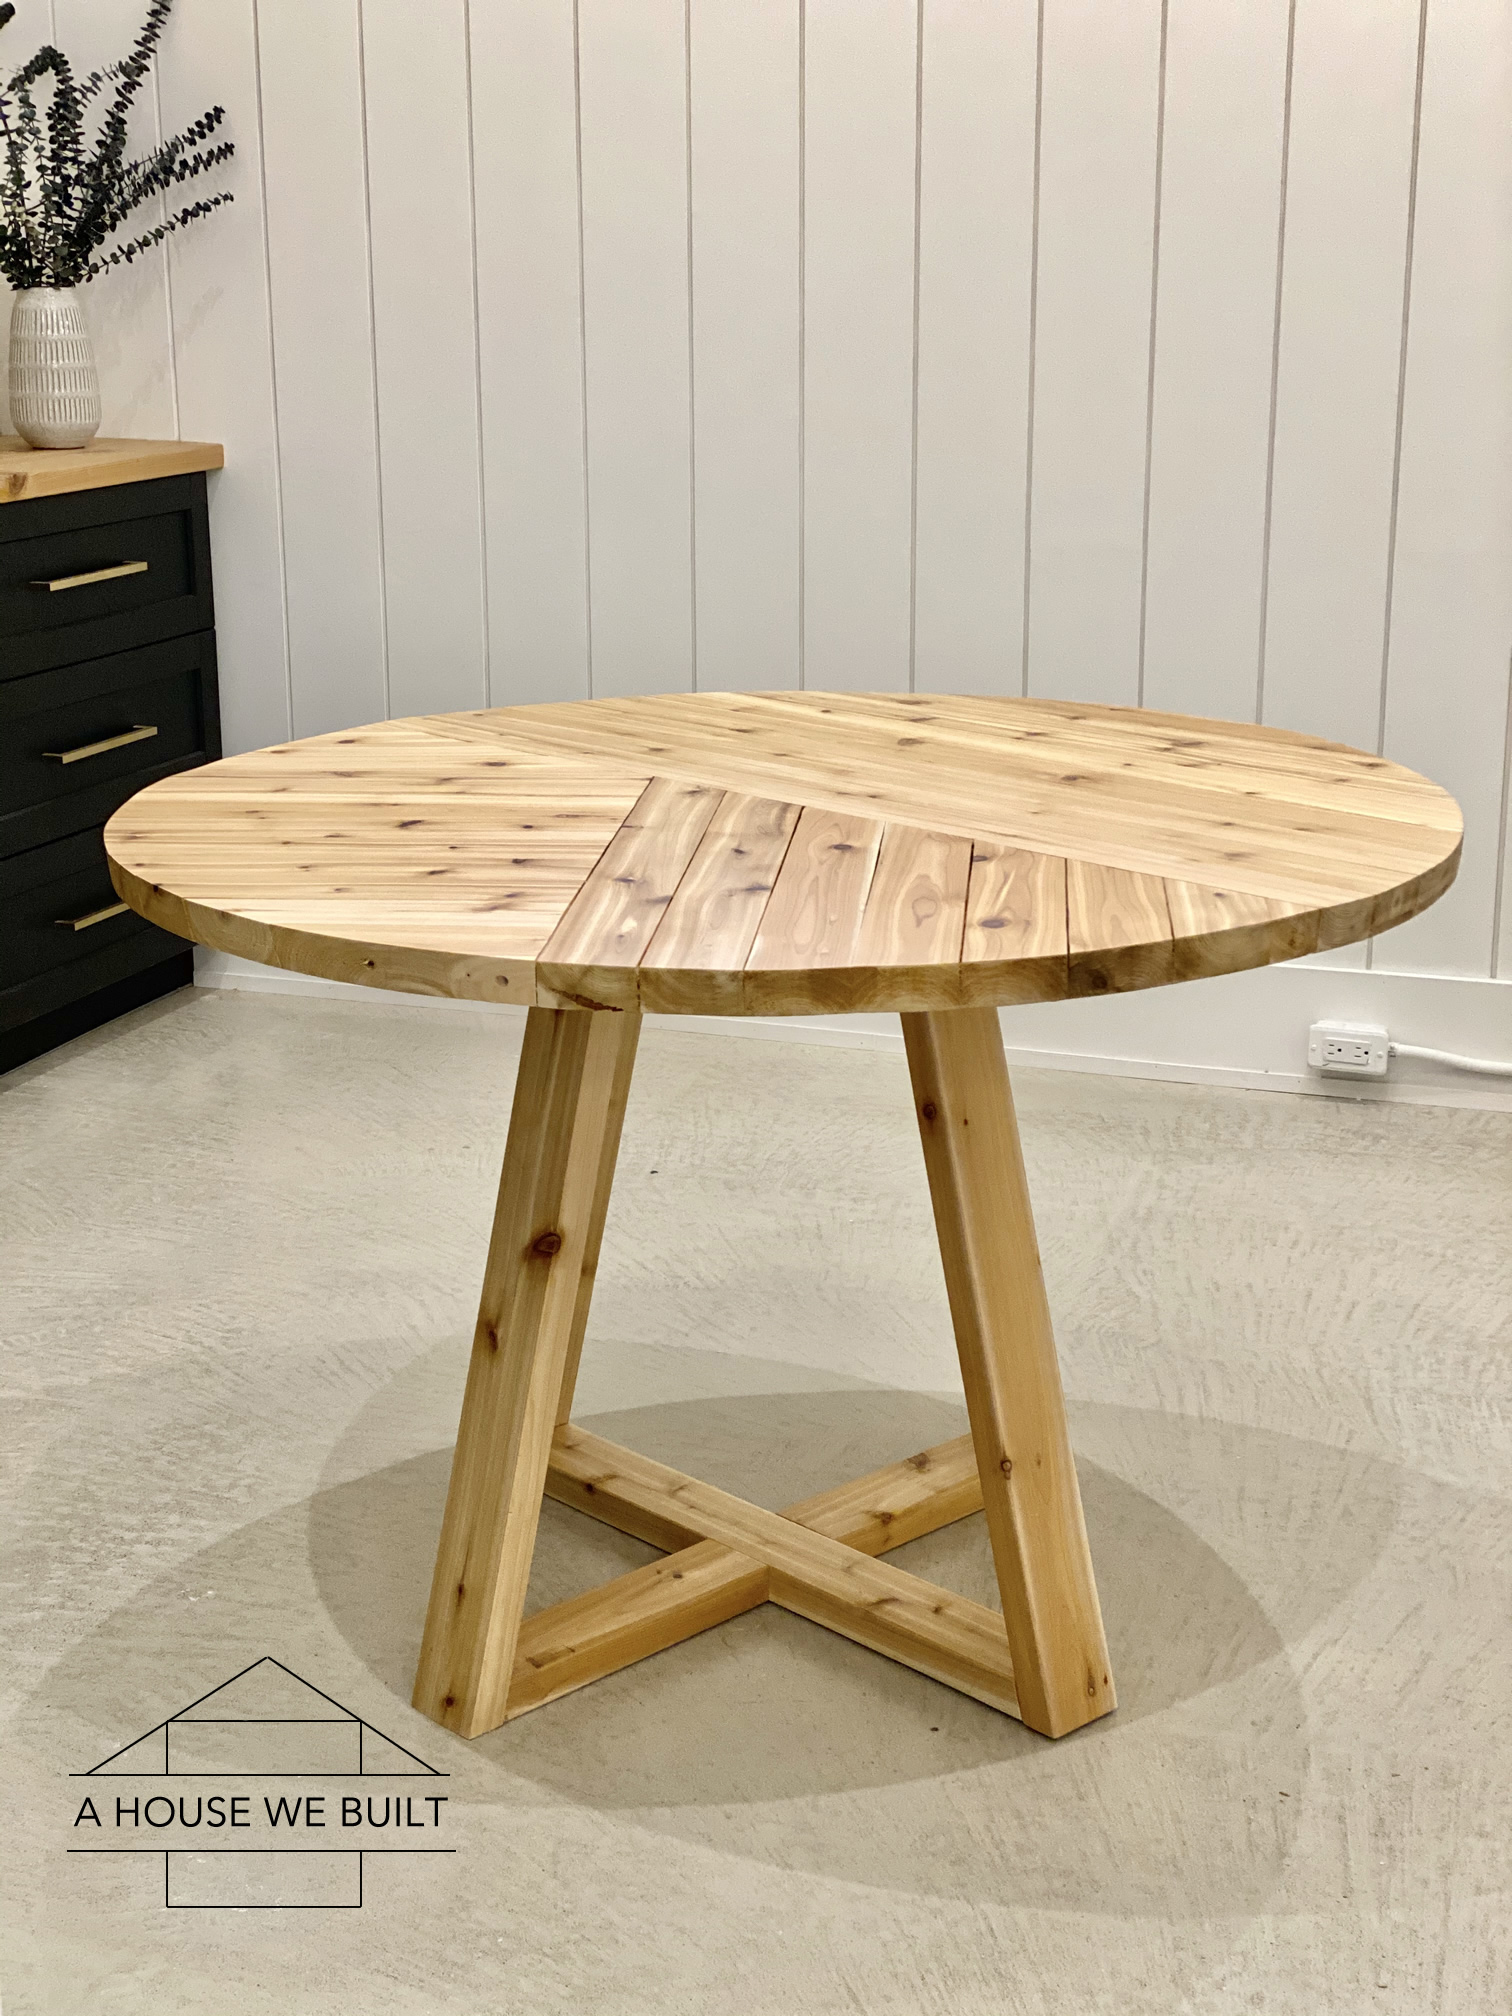 How To Build A Round Table, How To Make A Circular Table Base